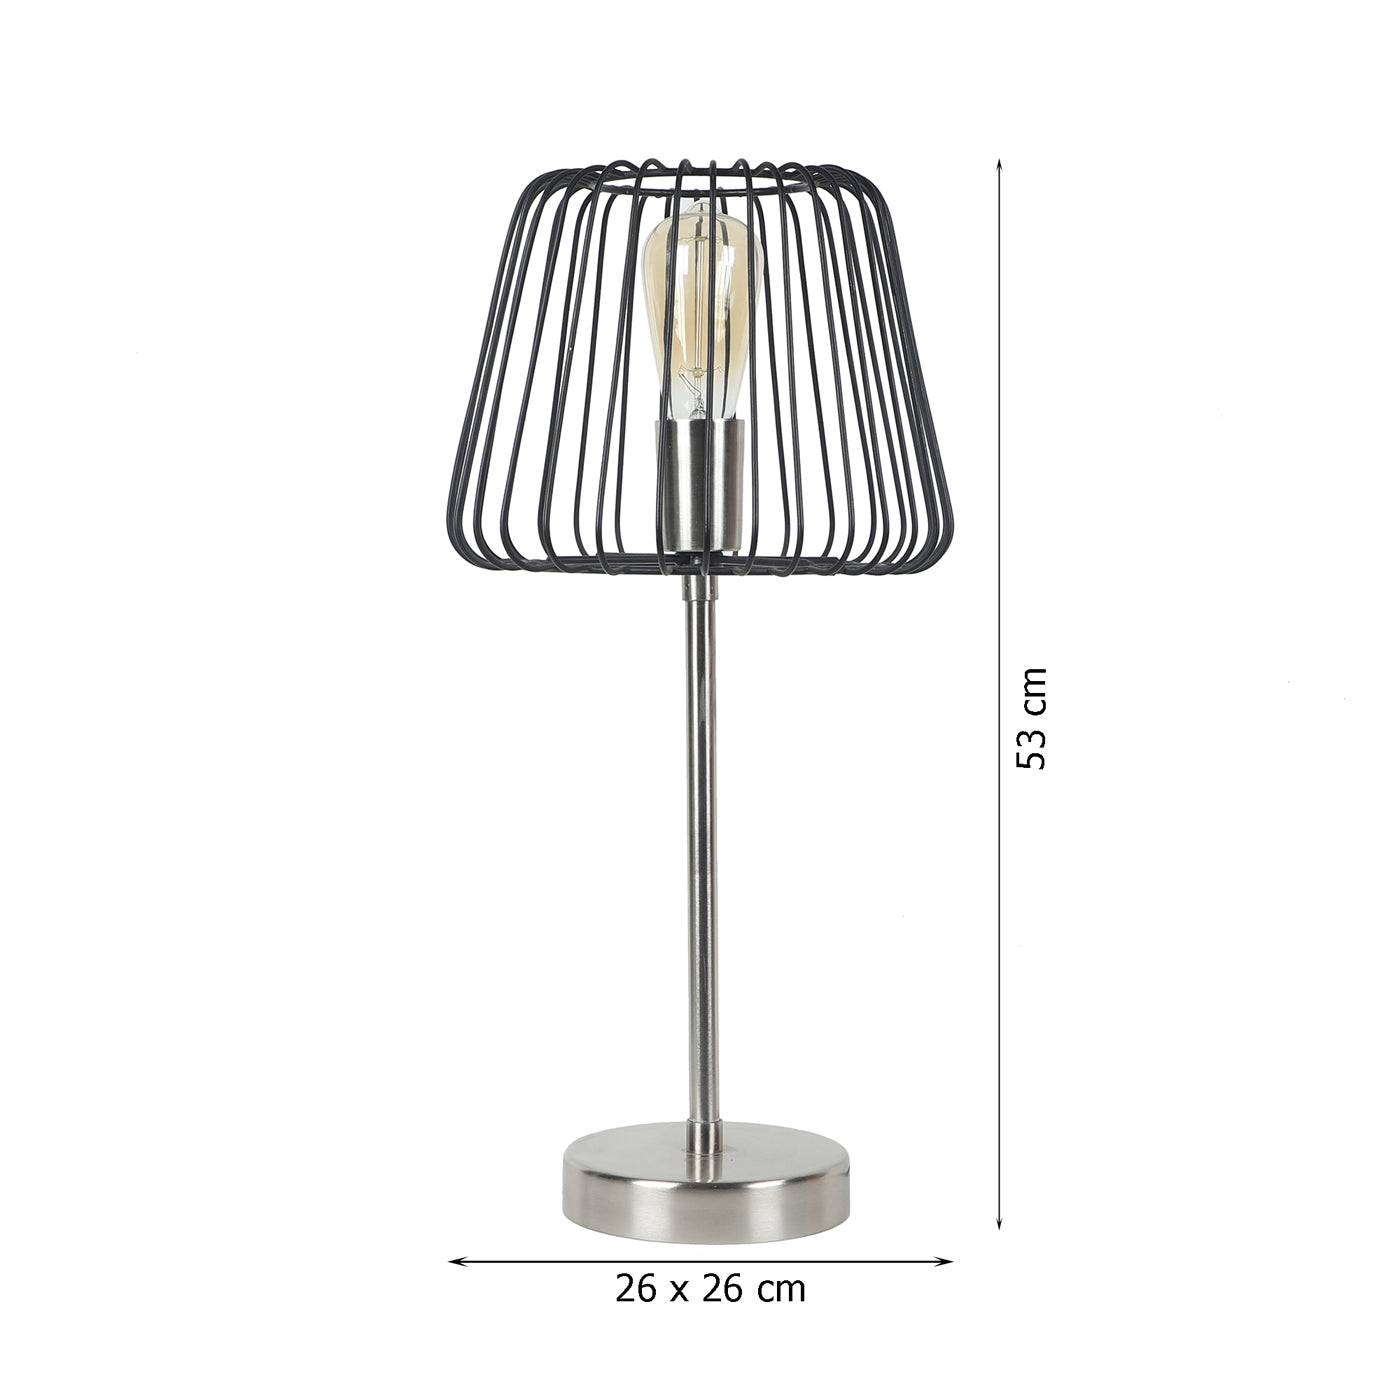 "The Confined Bulb" black and silver table lamp in Pewter finish